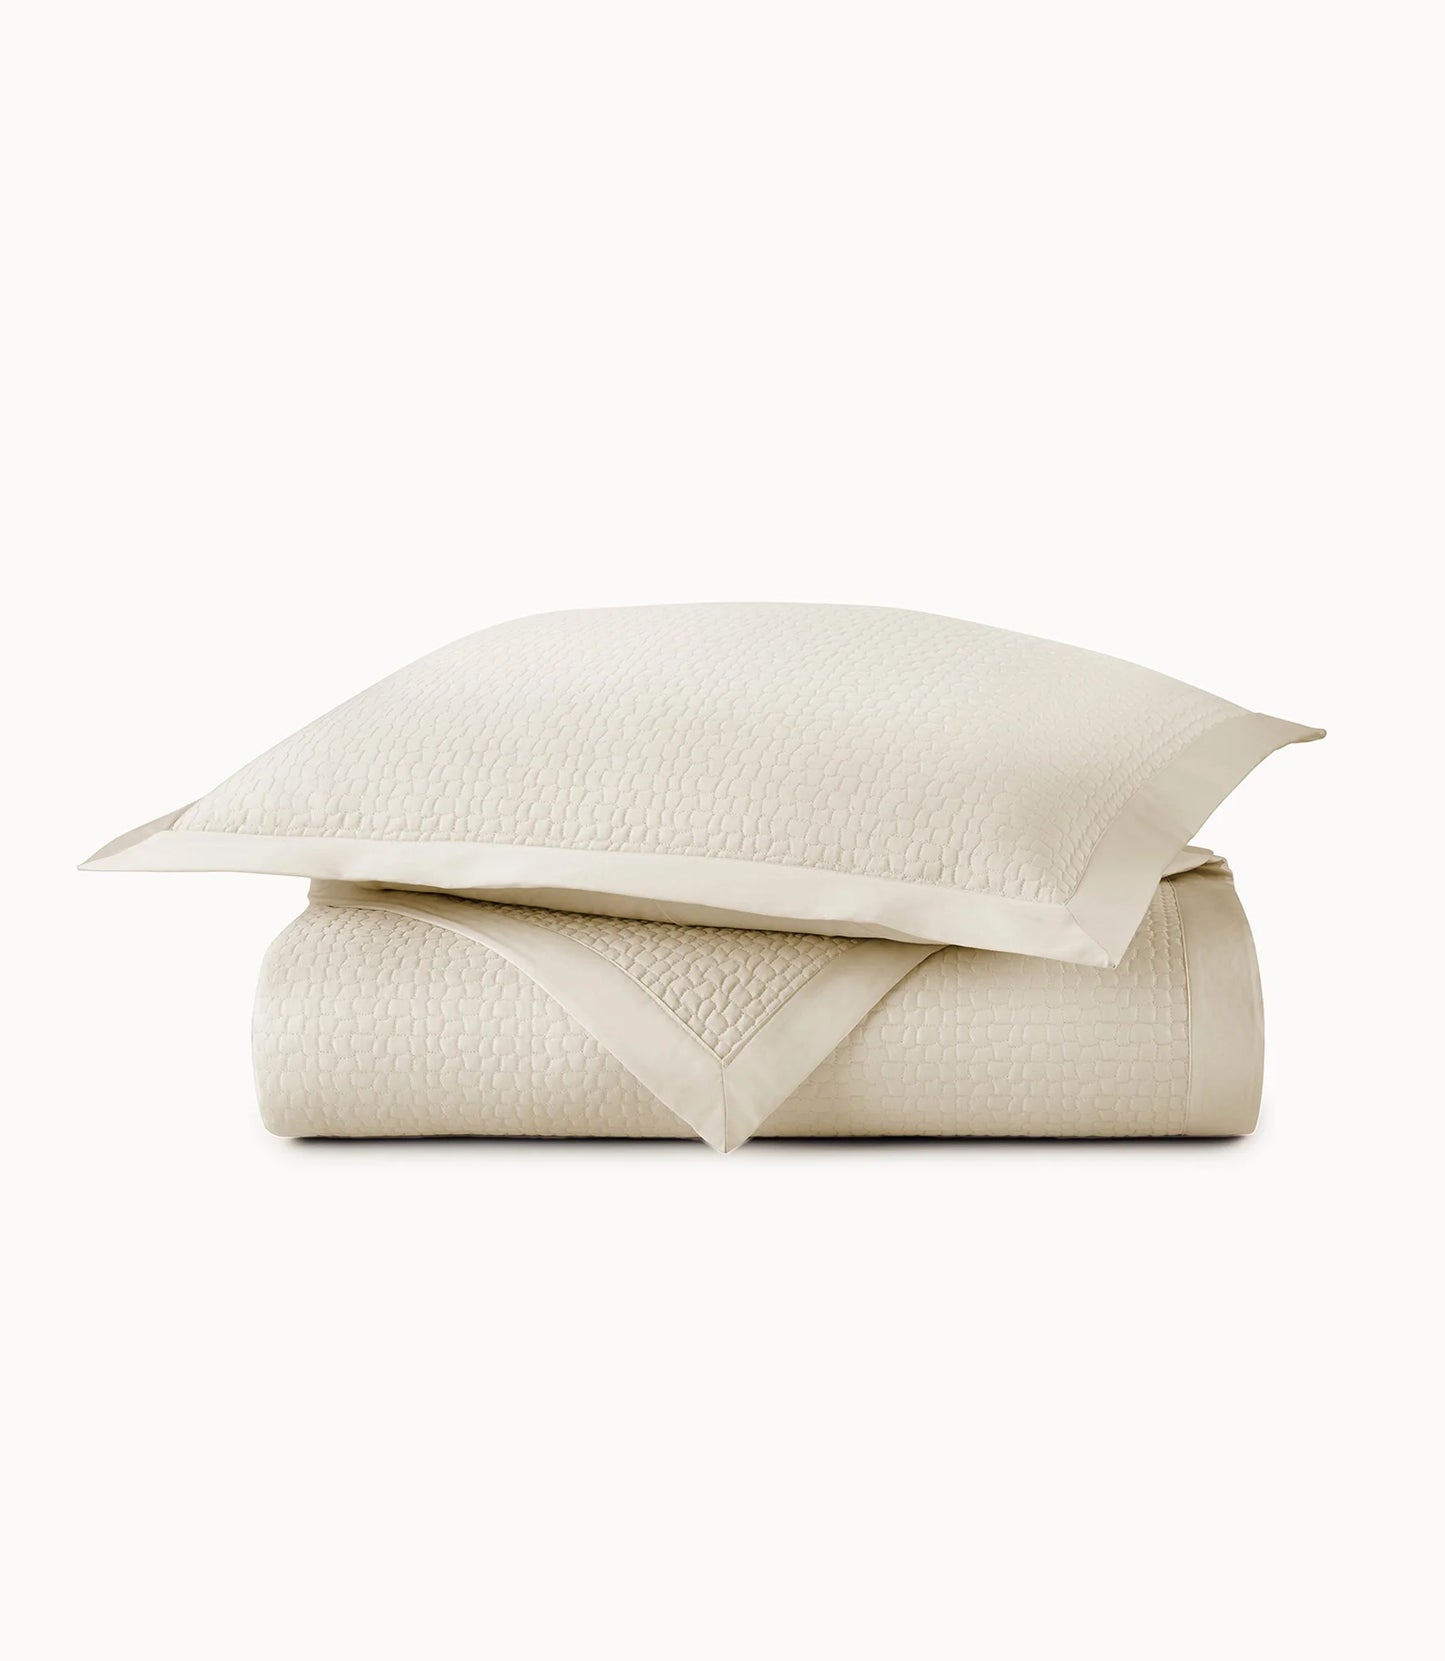 Hamilton Quilted Sham by PA